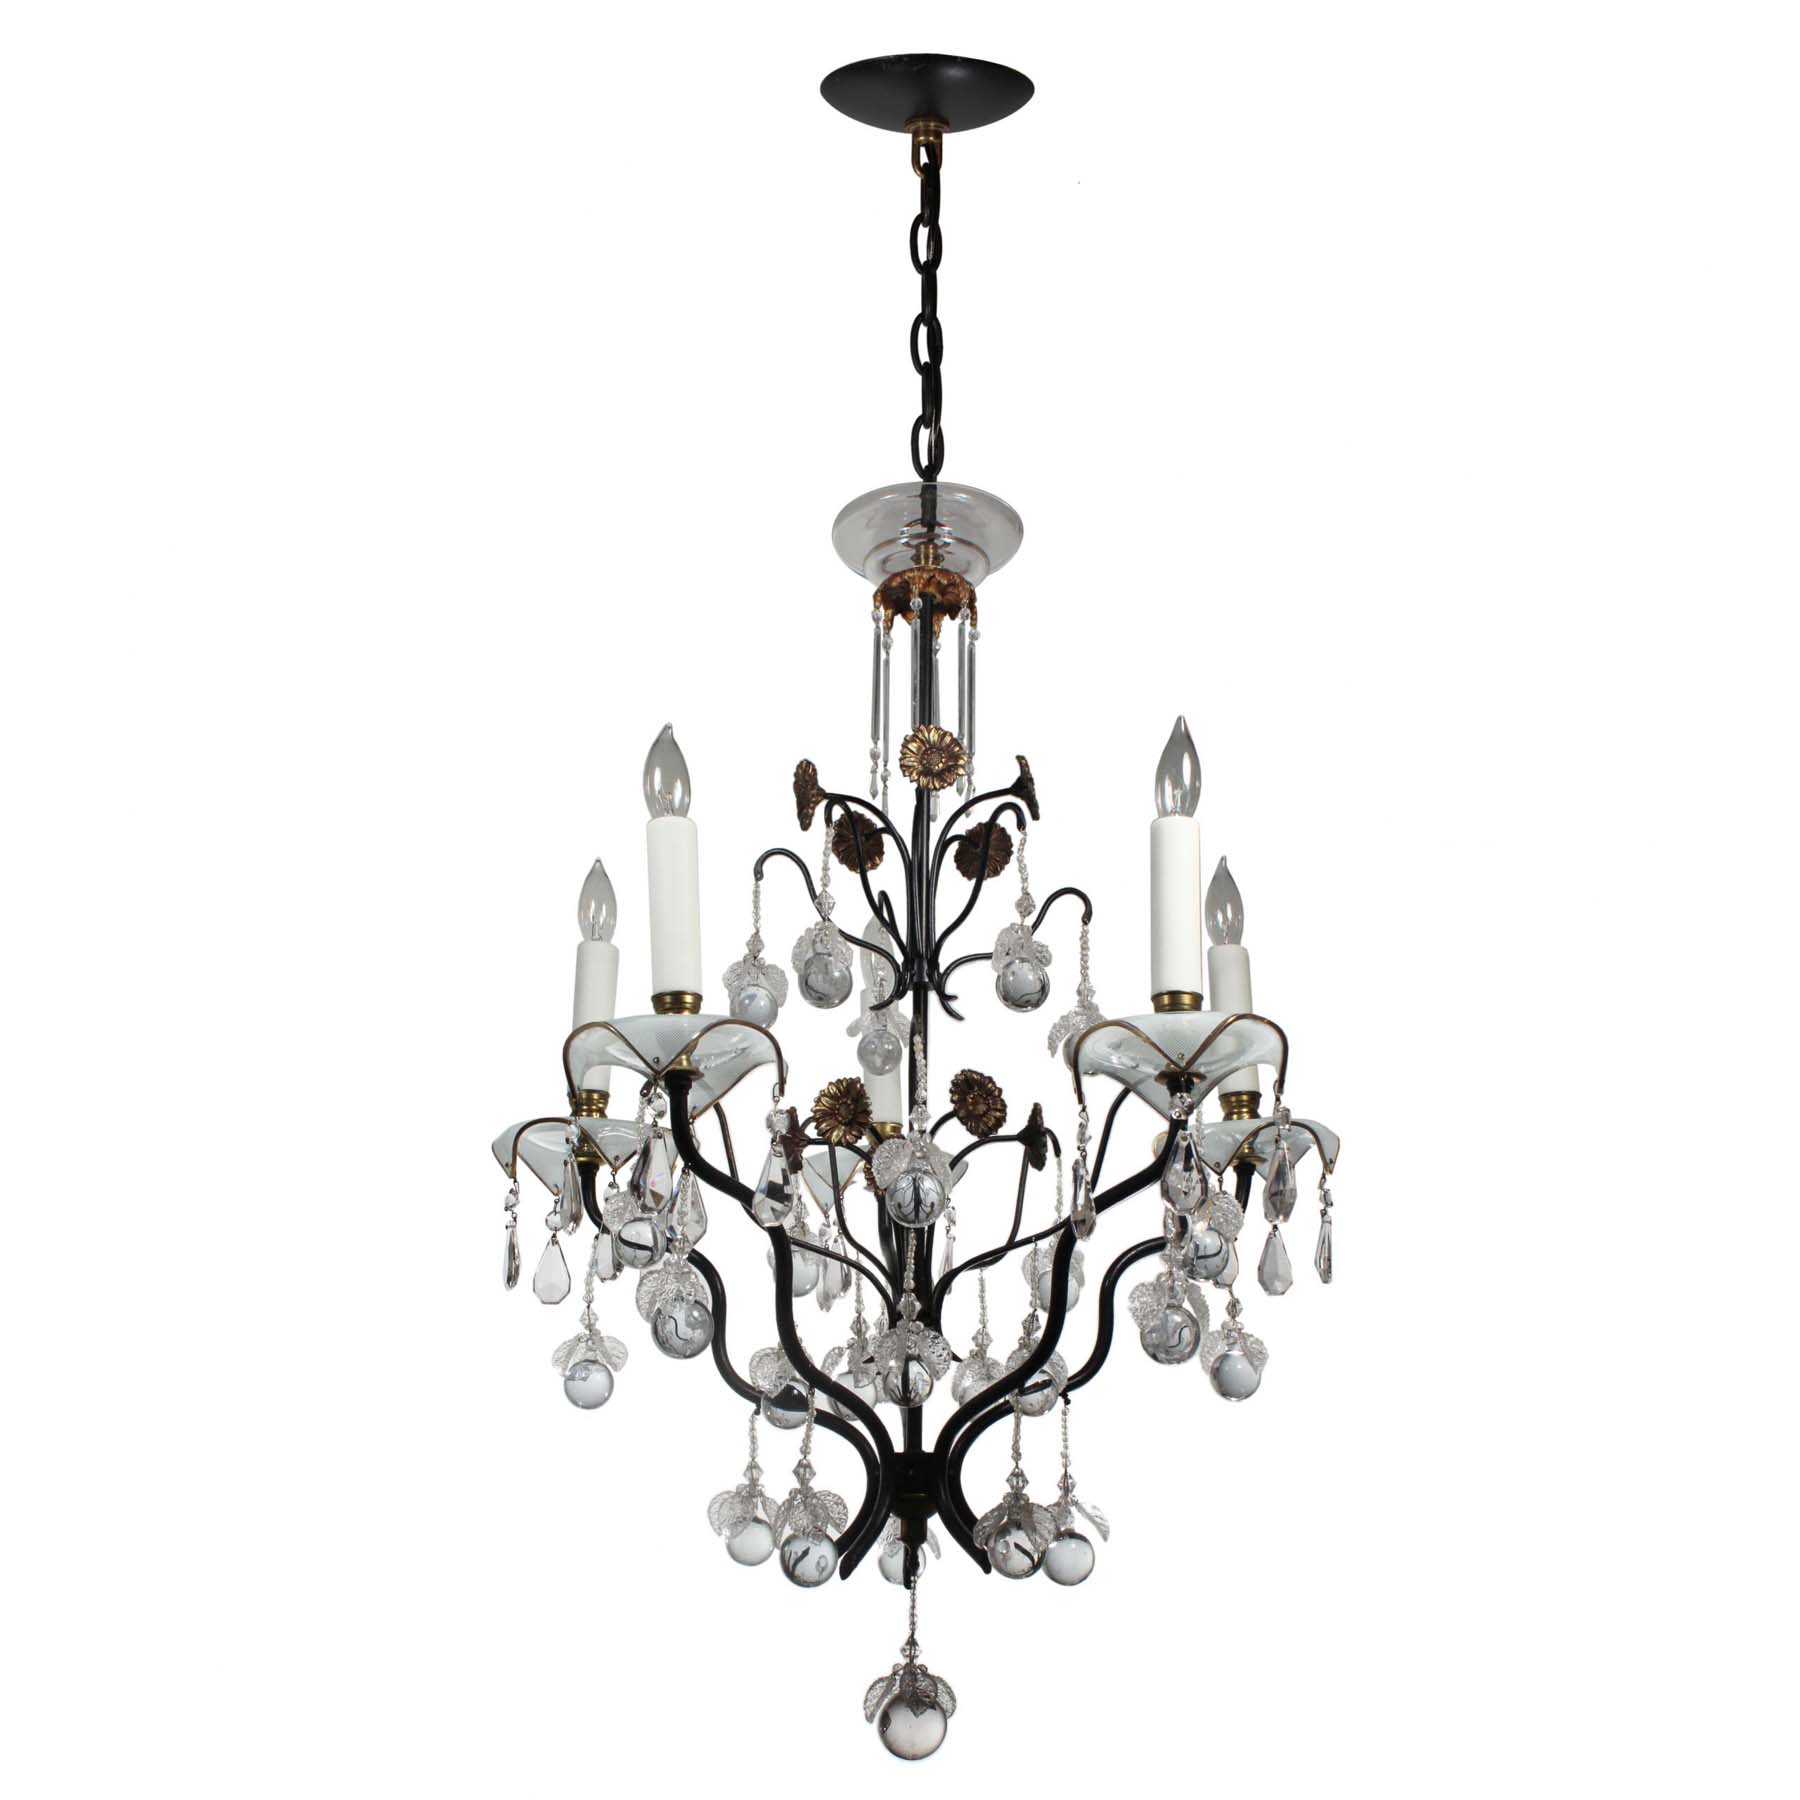 SOLD Antique Neoclassical Chandelier with Unusual Prisms-69944